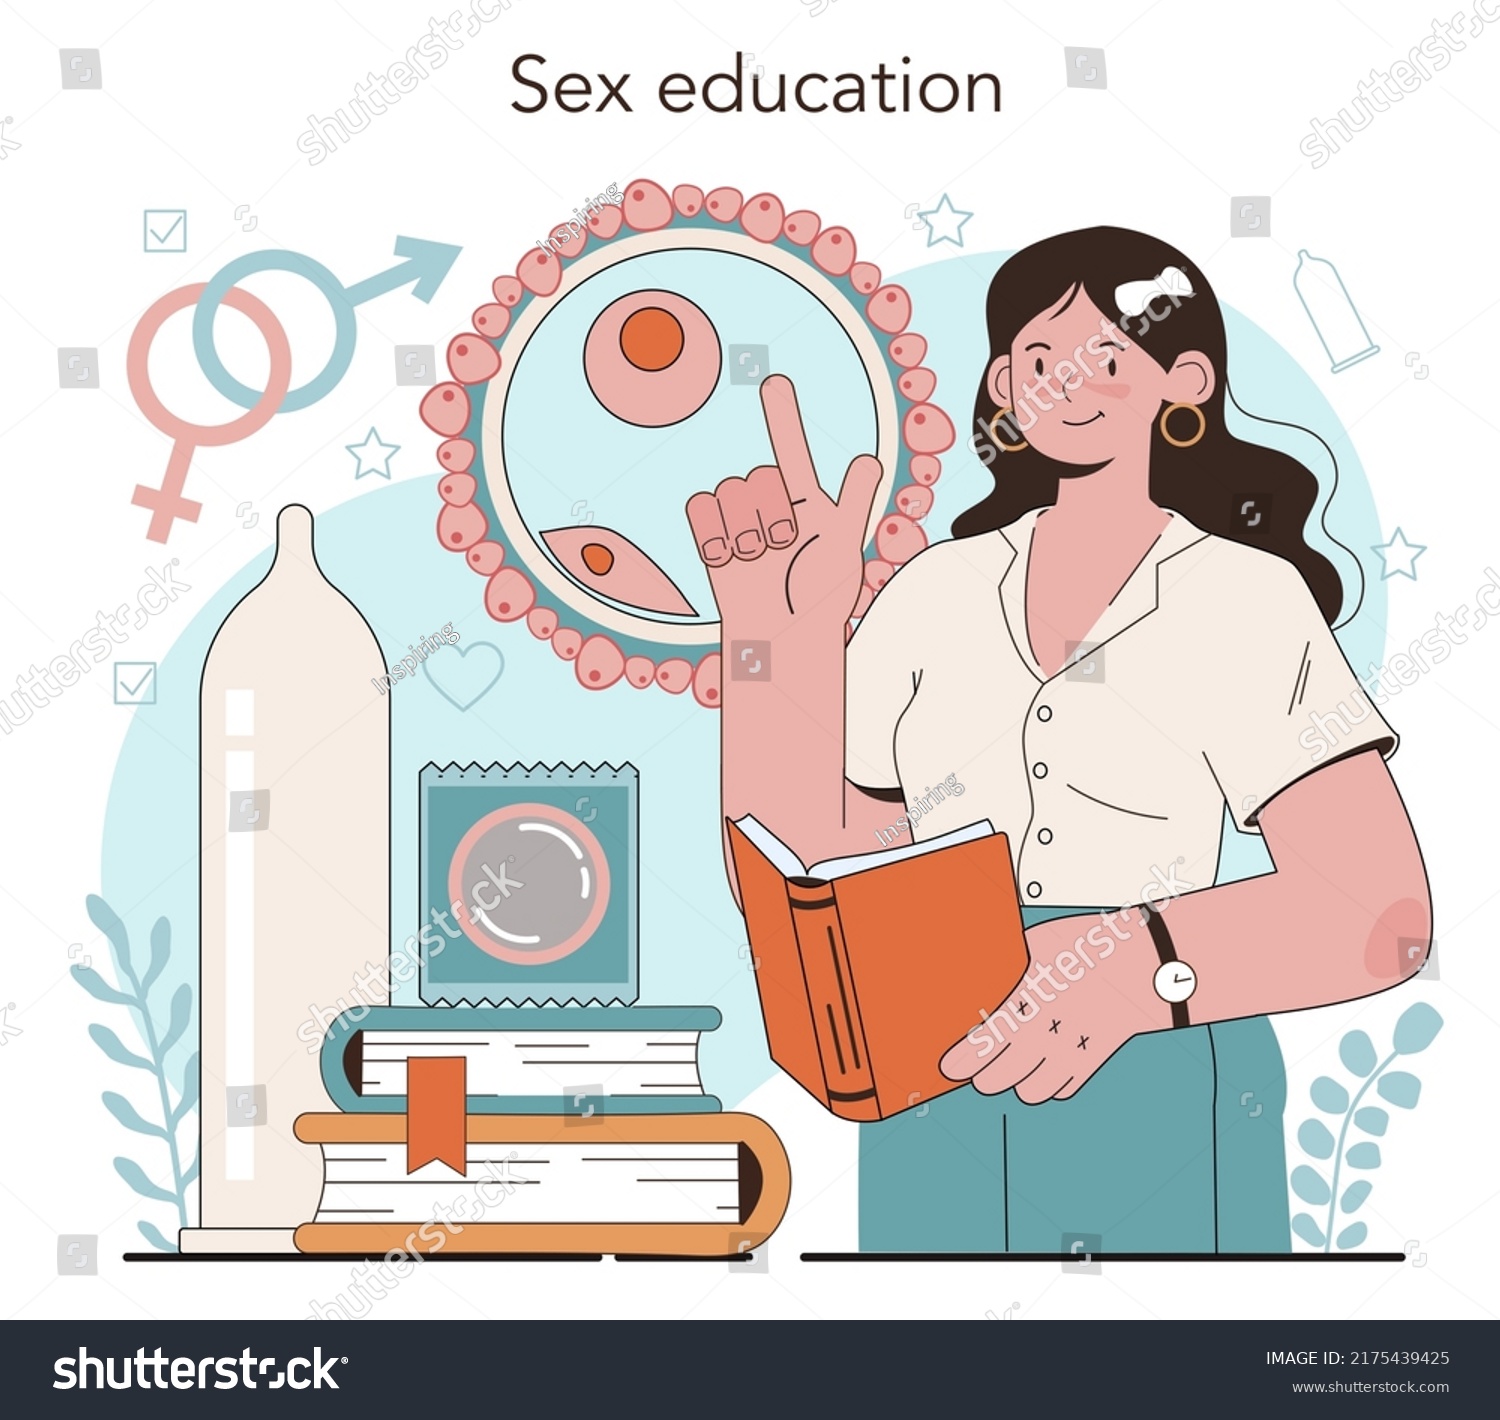 Sexual Education Concept Sexual Health Lesson Stock Vector Royalty Free 2175439425 Shutterstock 